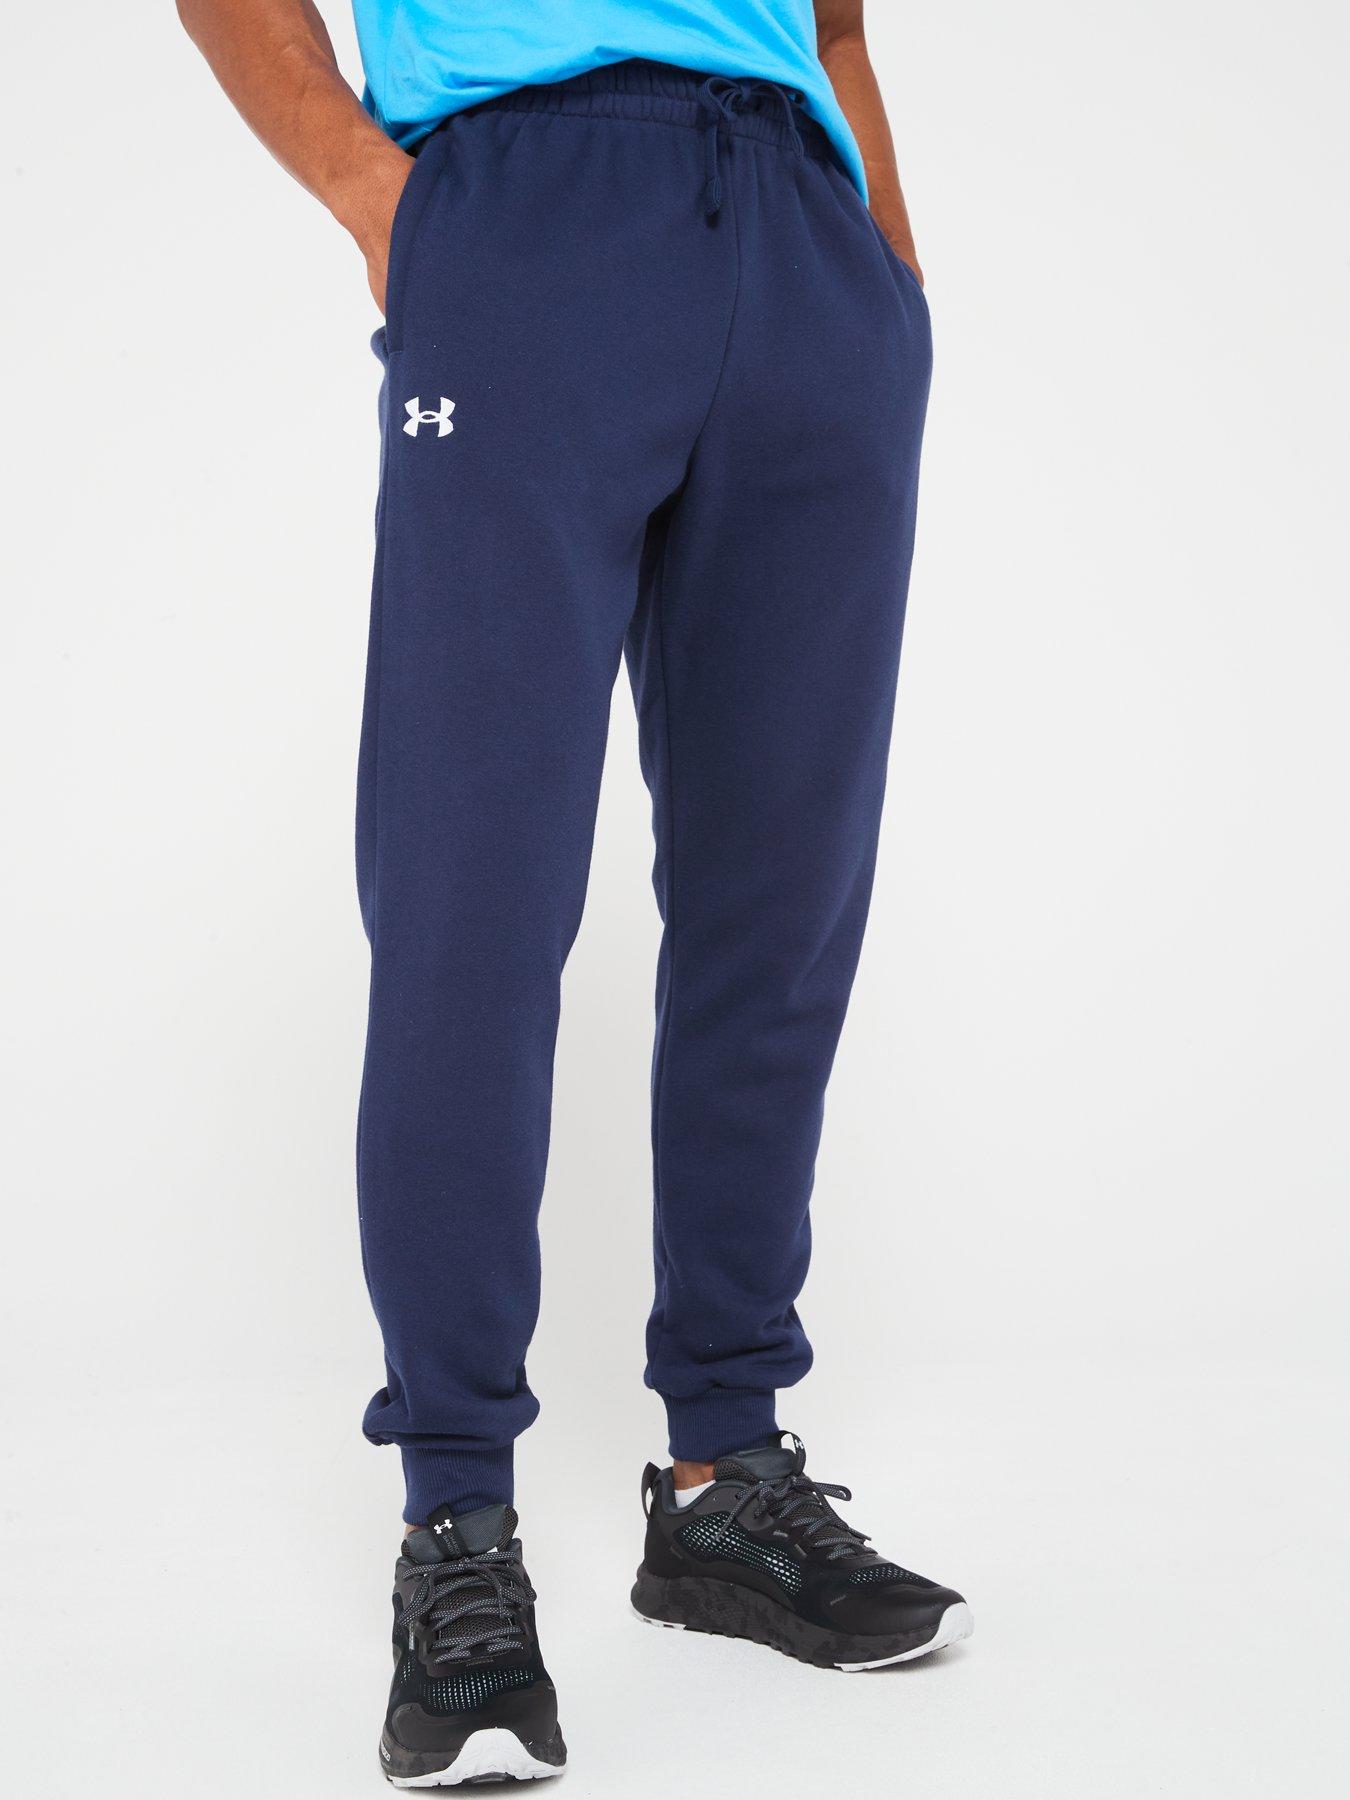  Under Armour Mens Rival Fleece Printed Joggers, (025